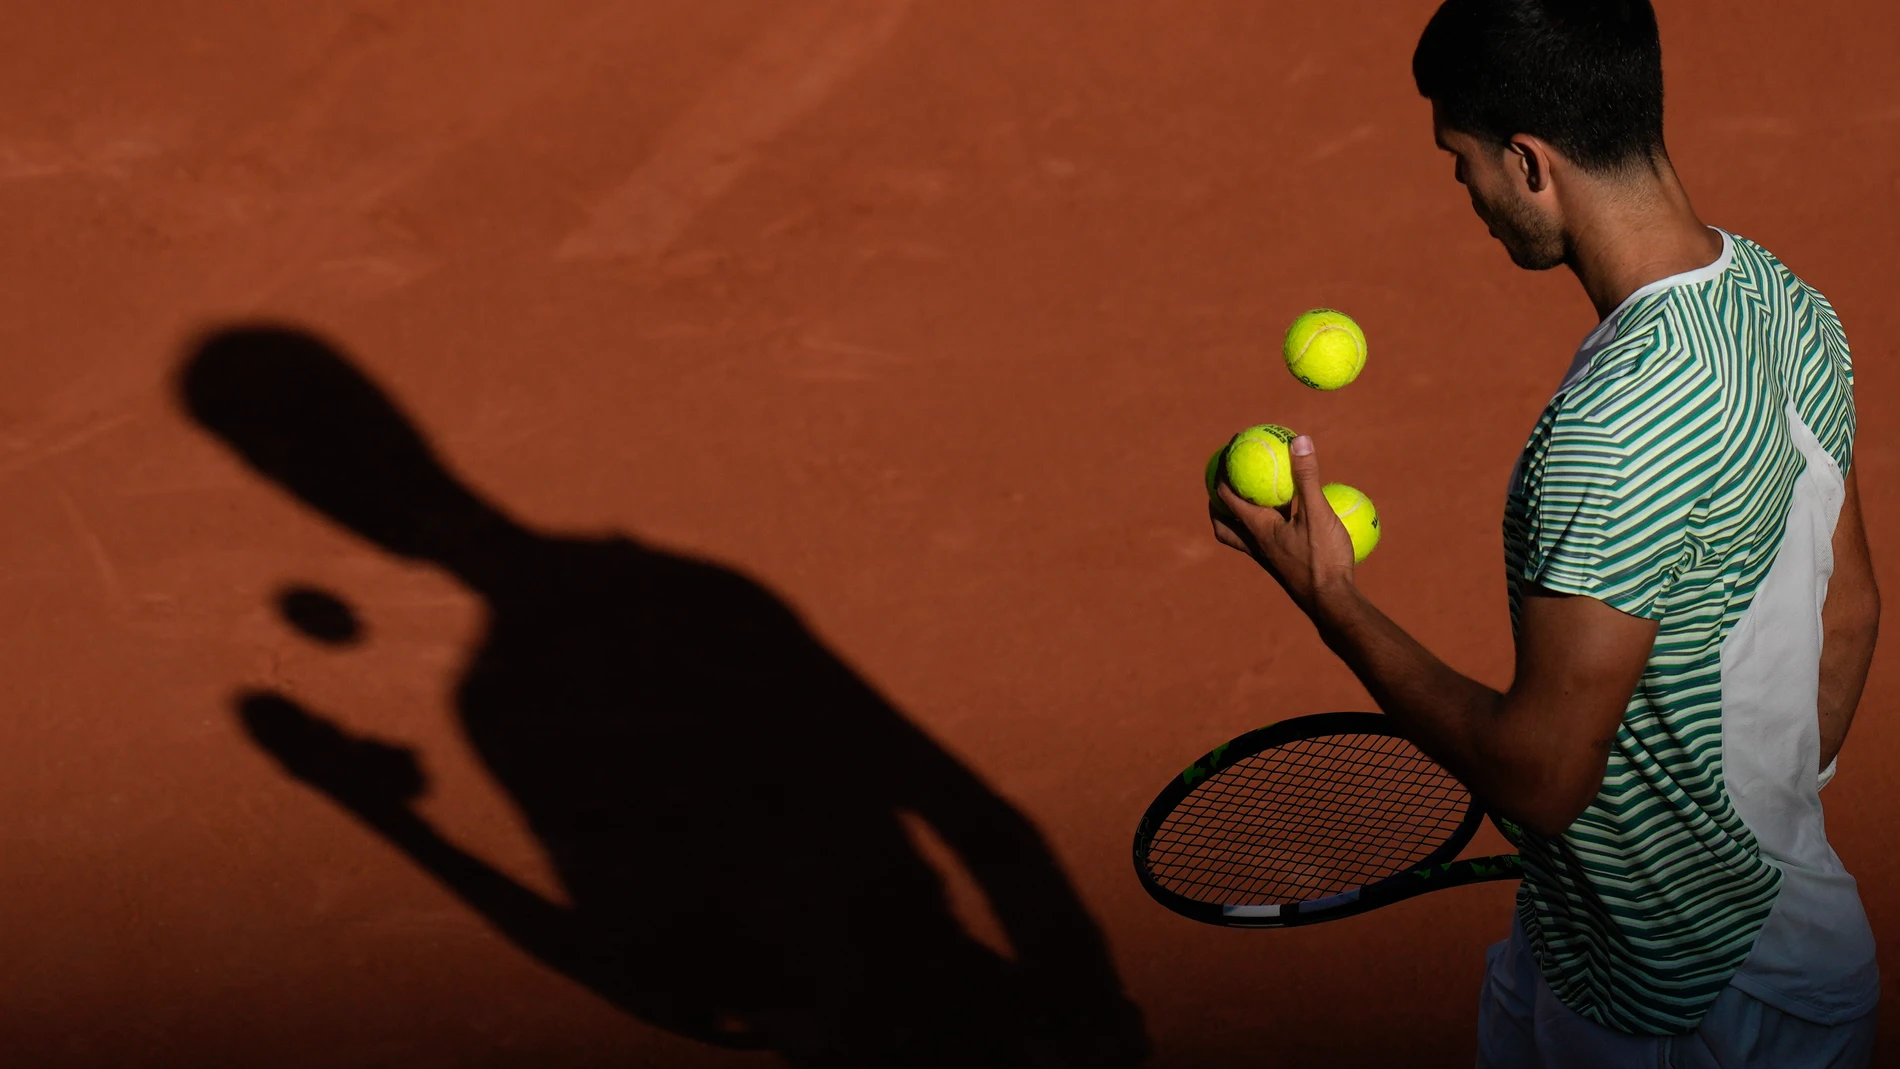 Spain's Carlos Alcaraz plays with 3 balls in his hand as he prepares to serve during his second round match of the French Open tennis tournament against Japan's Taro Daniel, at the Roland Garros stadium in Paris, Wednesday, May 31, 2023. (AP Photo/Thibault Camus)